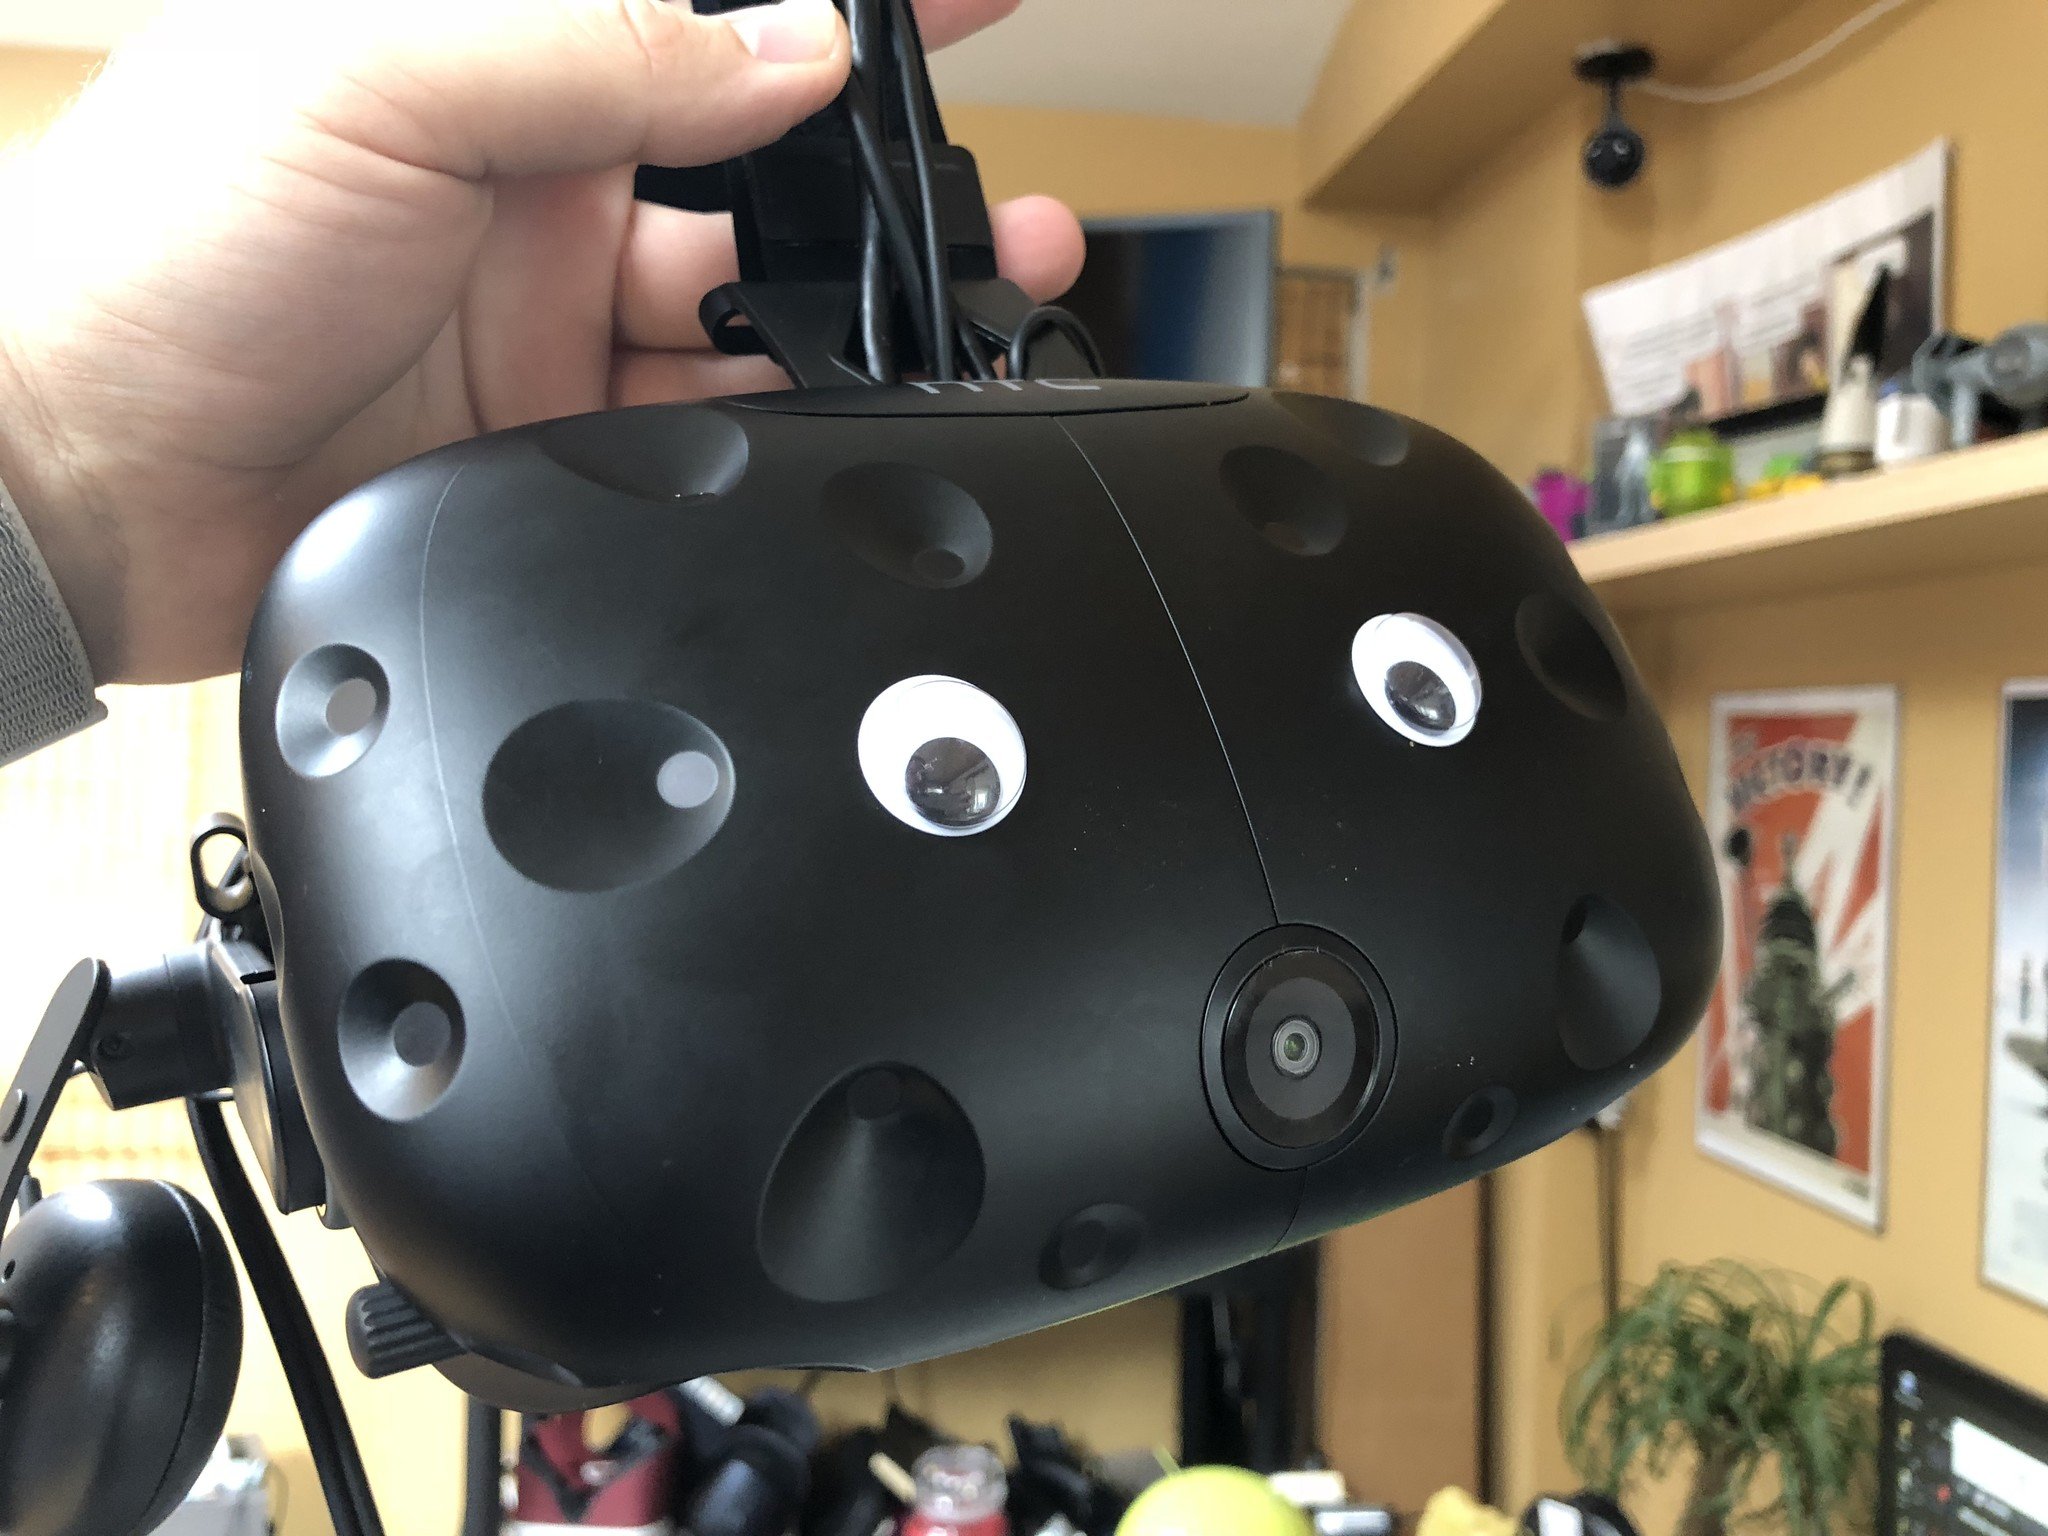 HTC is giving away free games in celebration of Vive Day